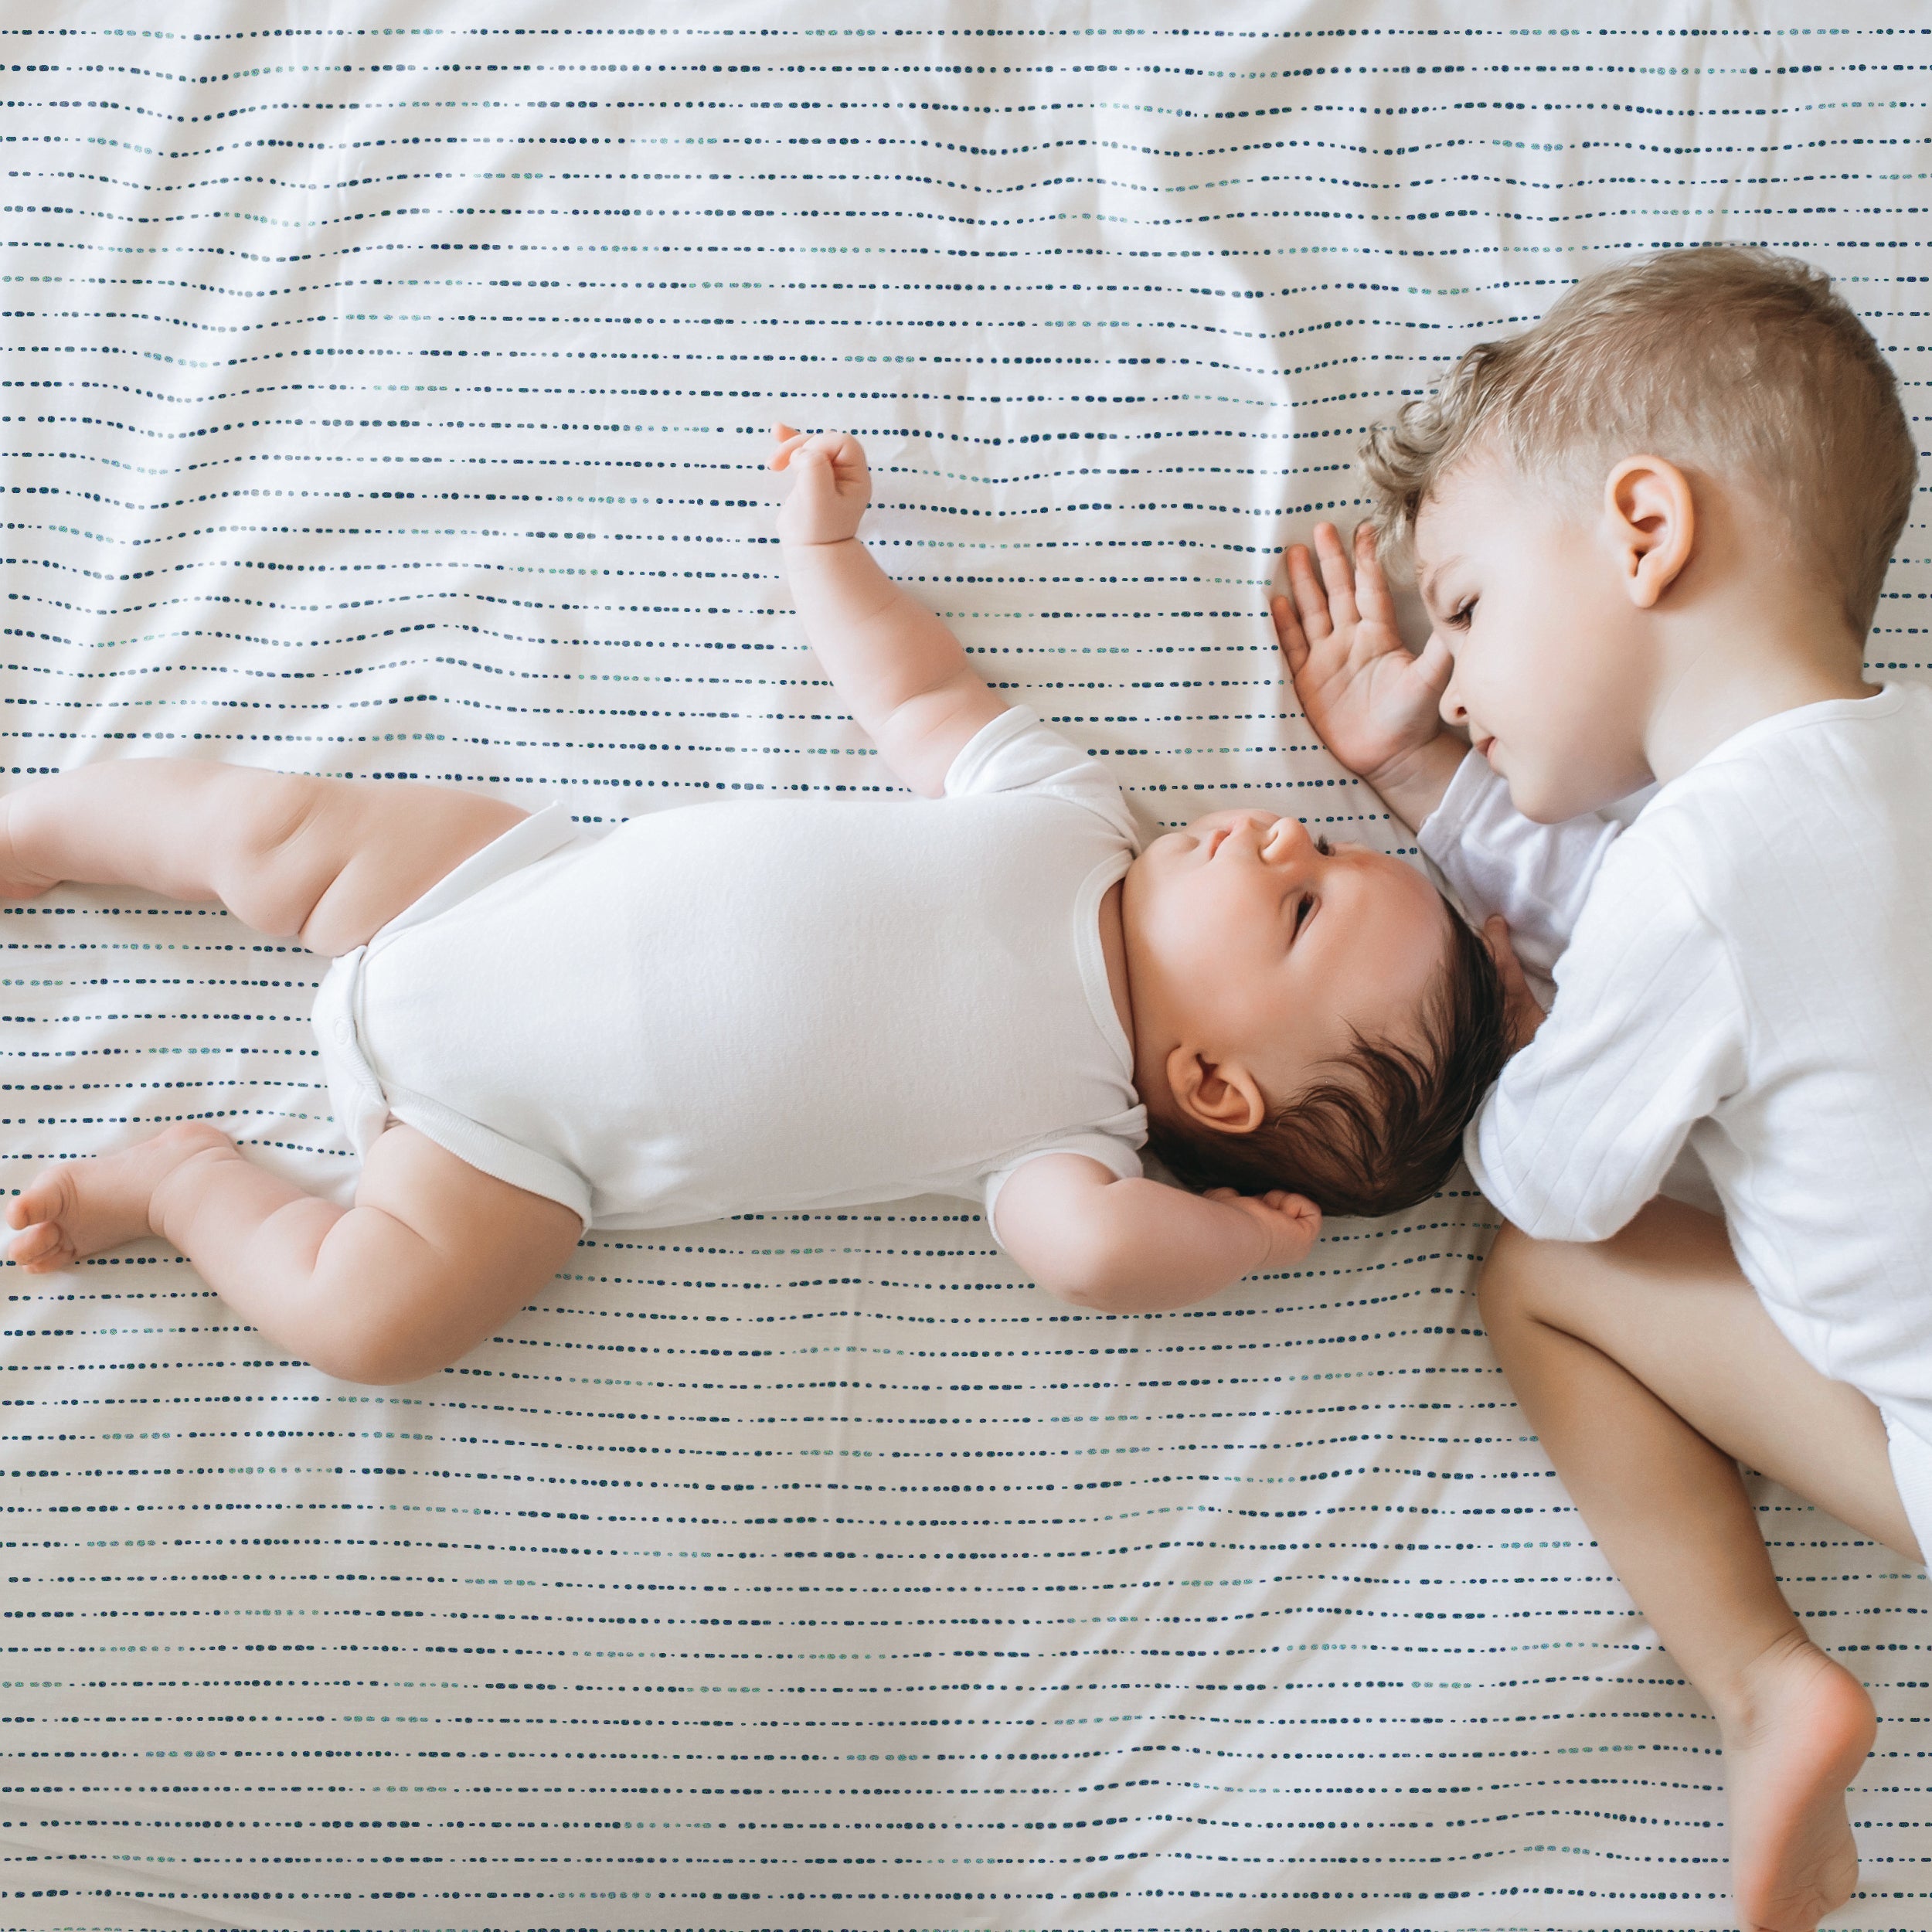 Two young children, a baby and a toddler, lying on a striped blanket. the toddler is gently touching the baby's hand, both dressed in white Makemake Organics Mini Crib Fitted Sheet in Pebble.